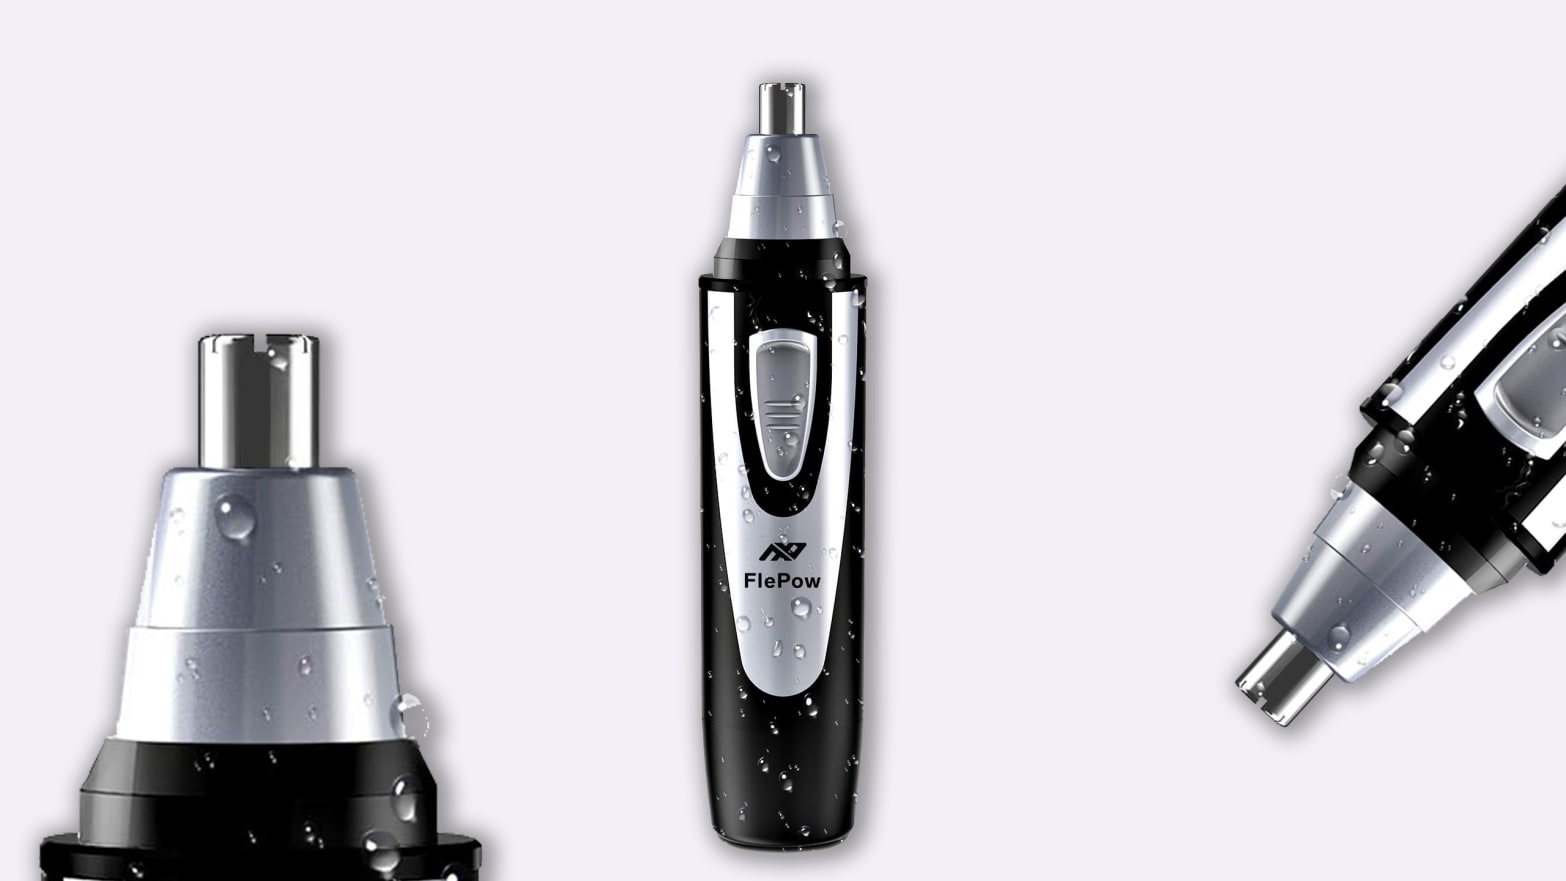 This $15 Nose Hair Trimmer Is the Best on Amazon